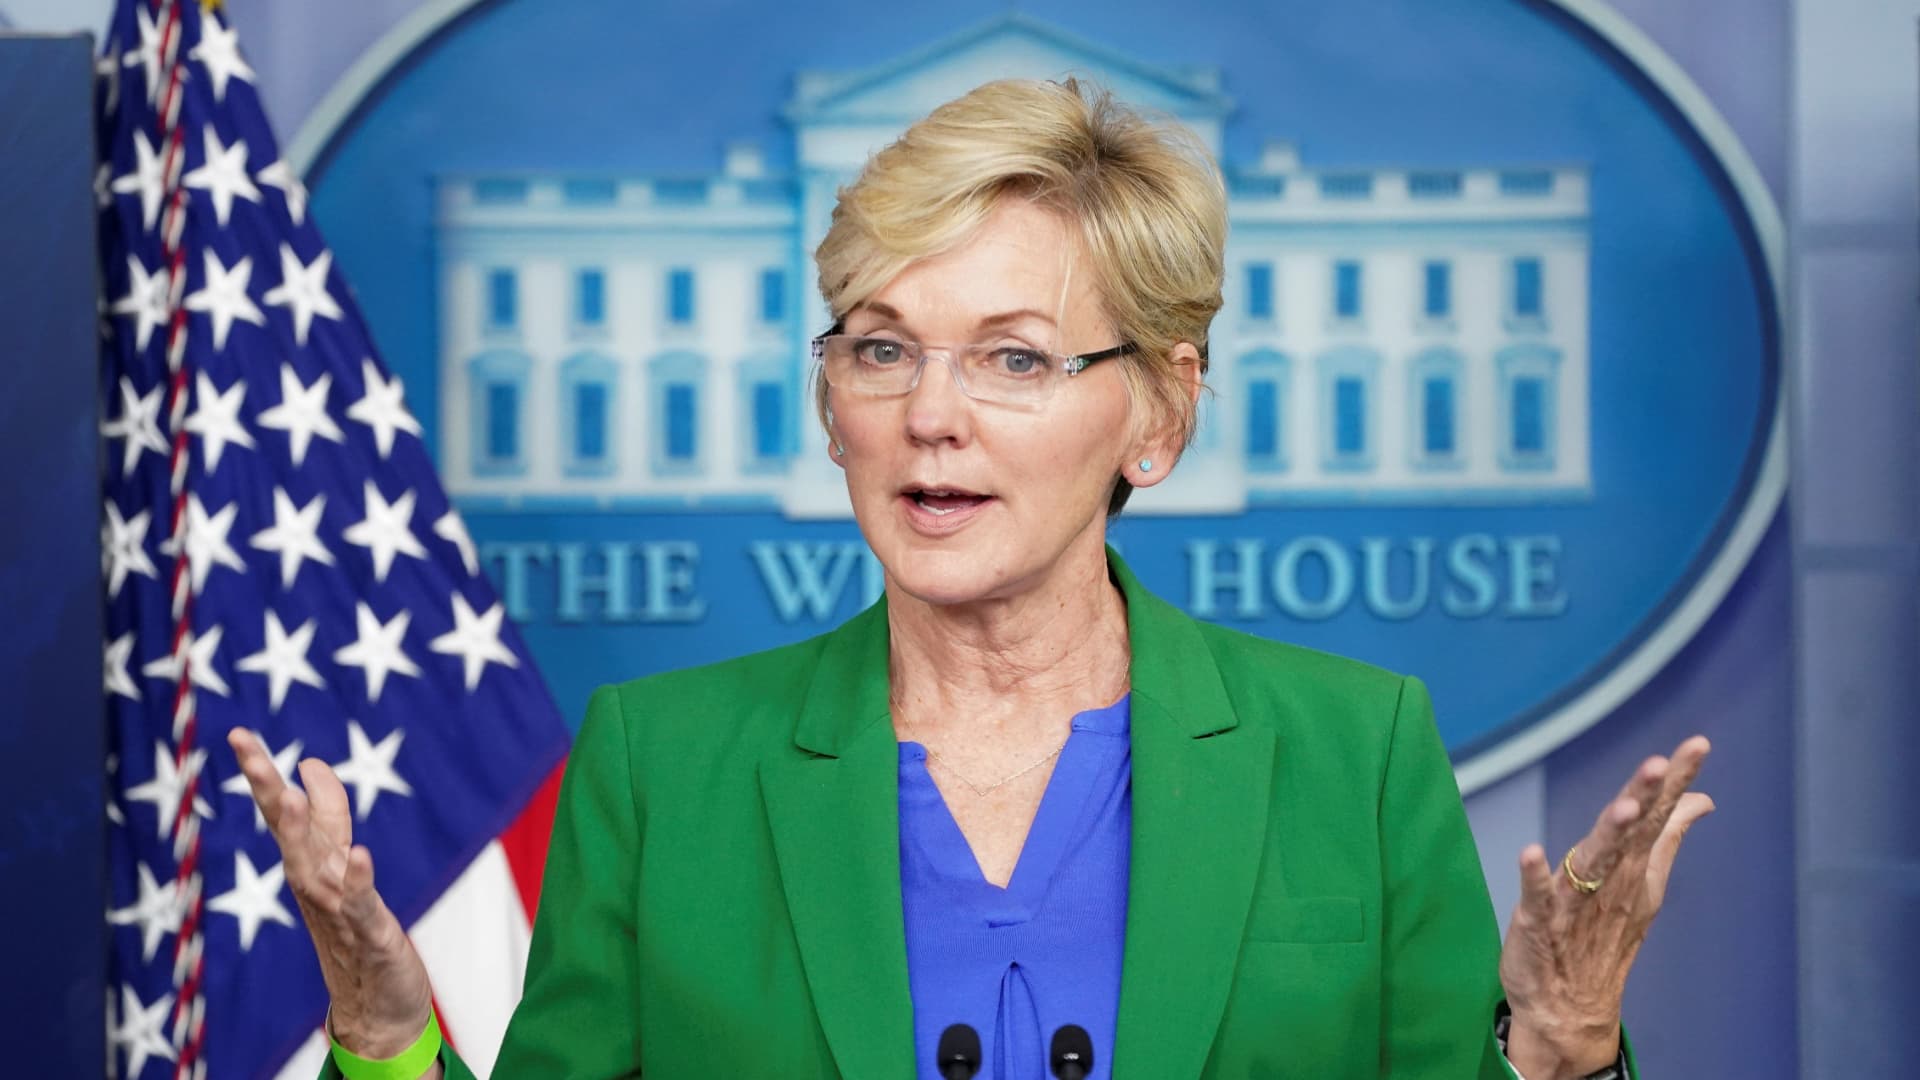 U.S. Energy Secretary Jennifer Granholm speaks about the Colonial Pipeline cyberattack shut down during a press briefing at the White House in Washington, May 11, 2021.